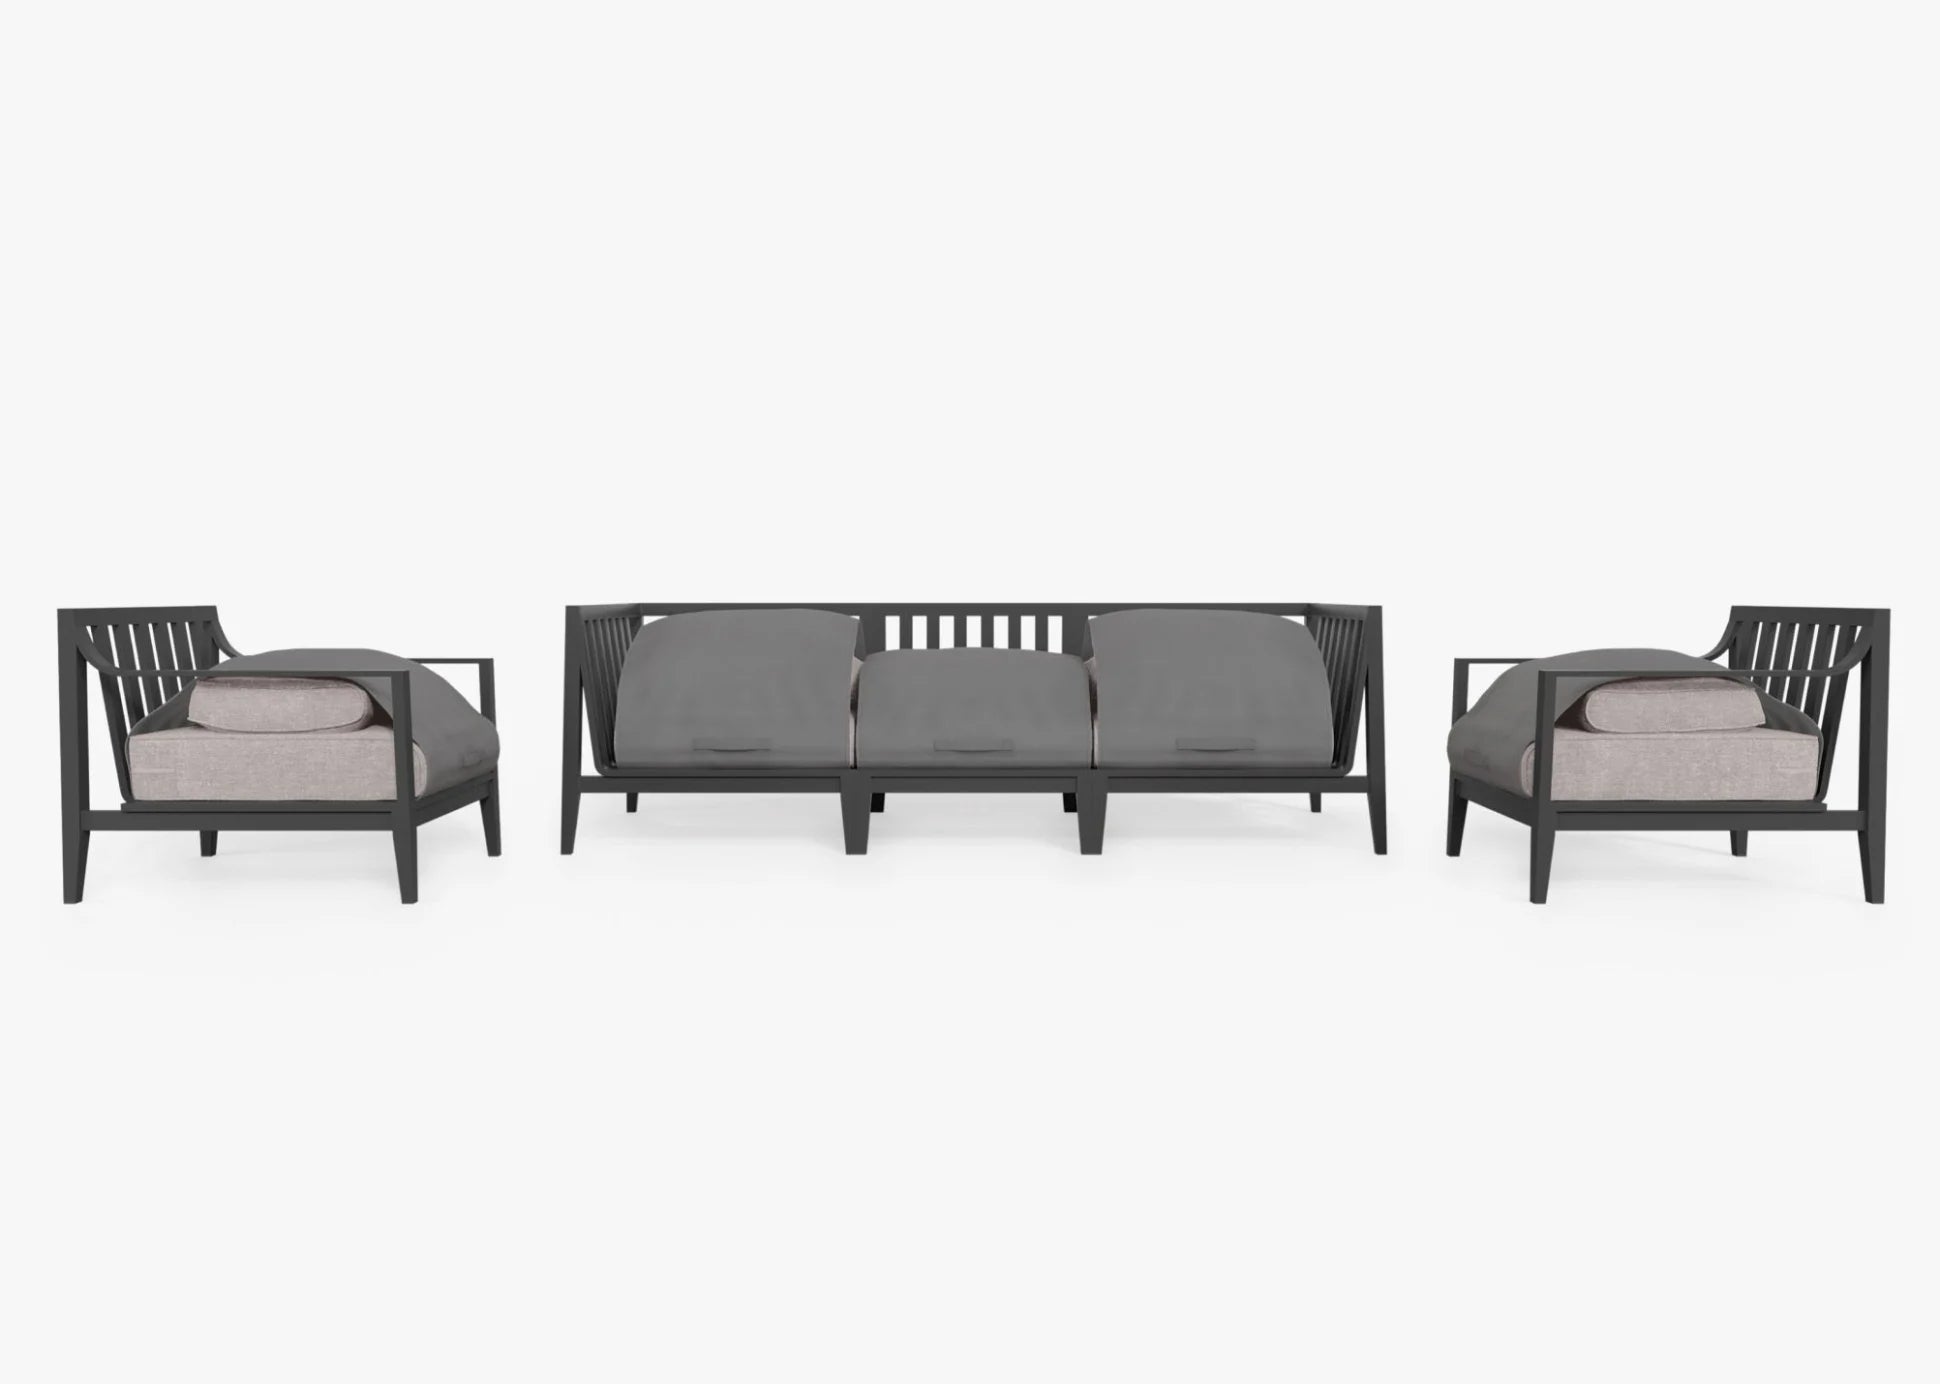 Live Outer 98" Charcoal Aluminum Outdoor Sofa With Armchairs and Sandstone Gray Cushion (5-Seat)